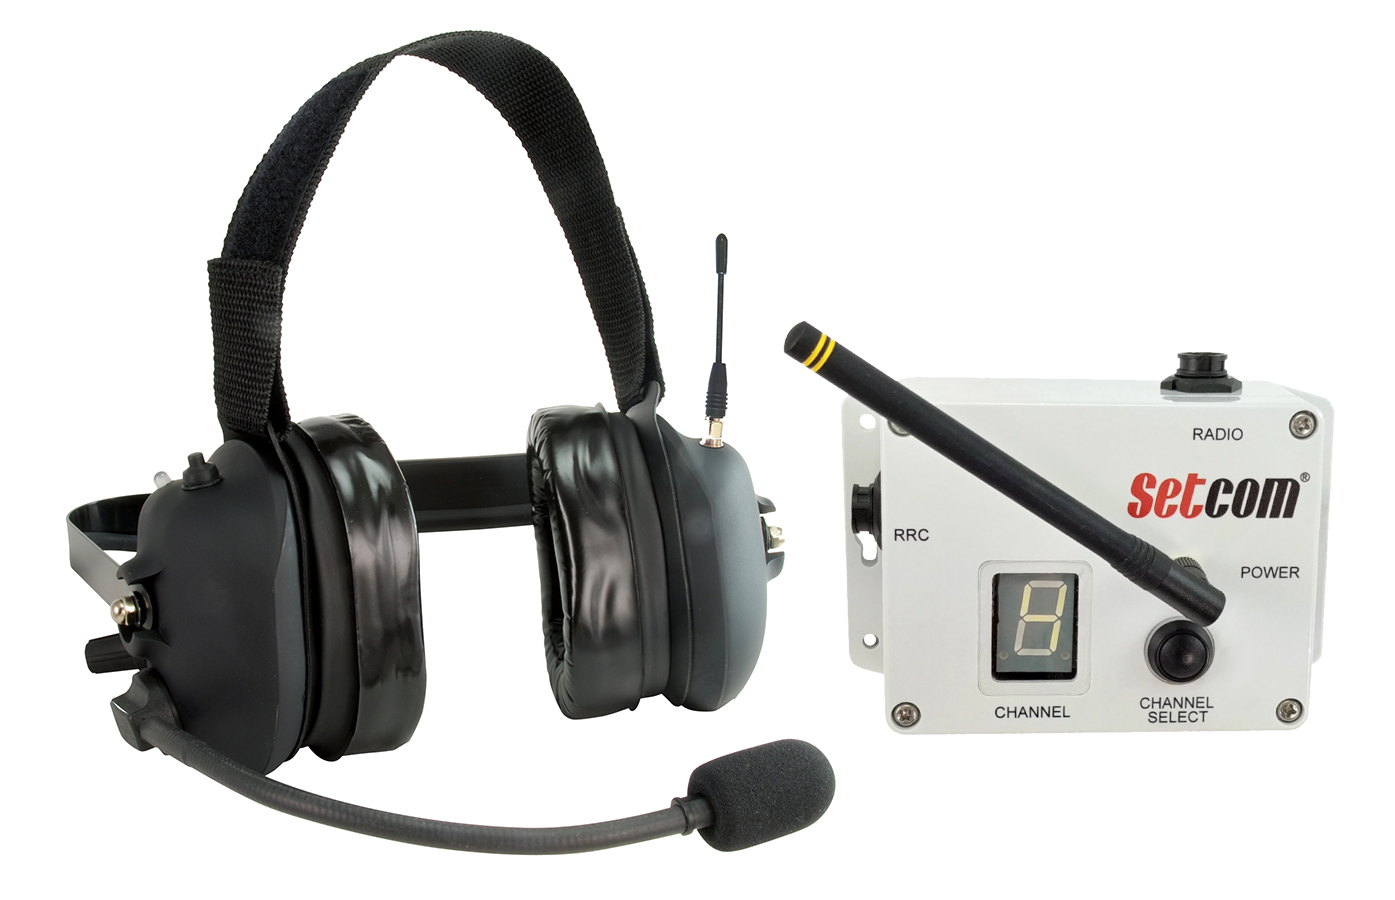 4 or 6 Crew Setcom LiberatorMax Fire Kit Headset for Fire Apparatus Communications